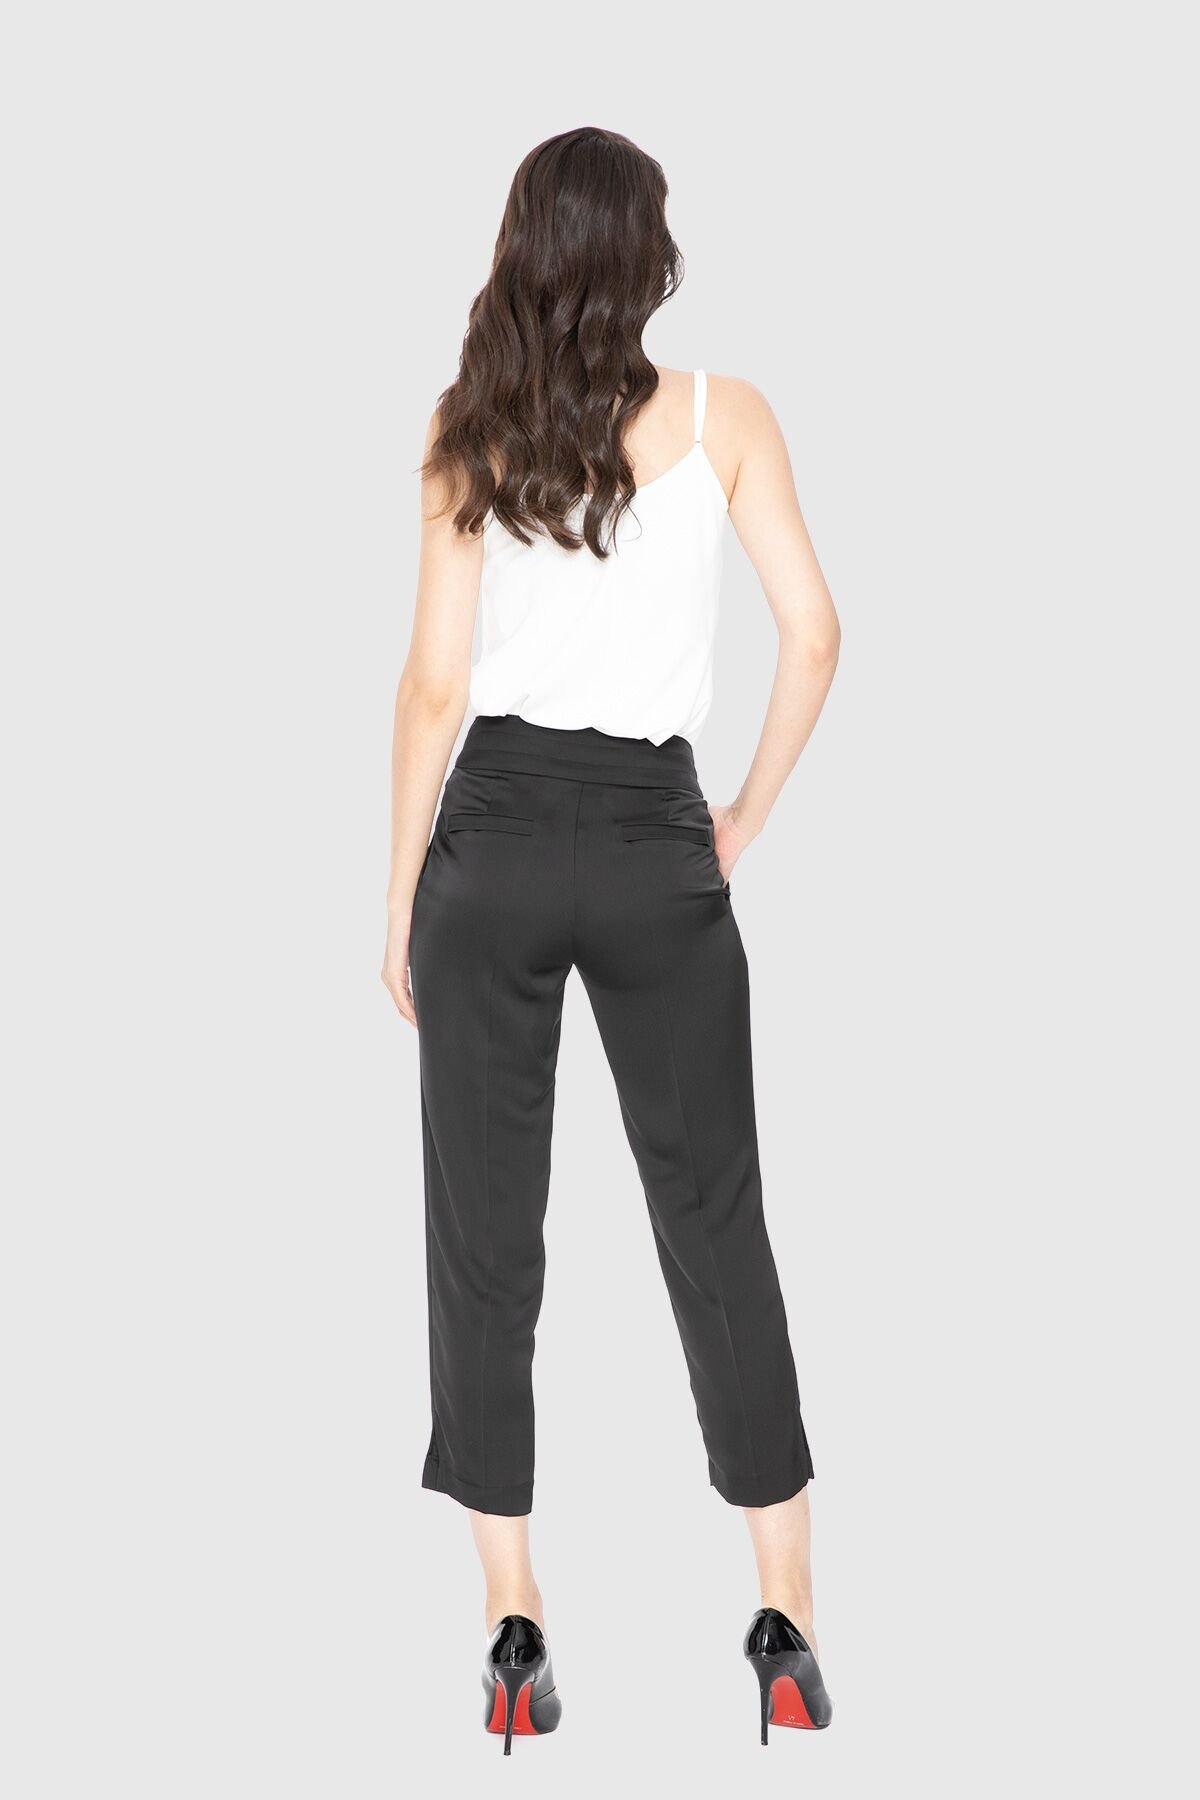 Pleated Ankle Length Black Trousers